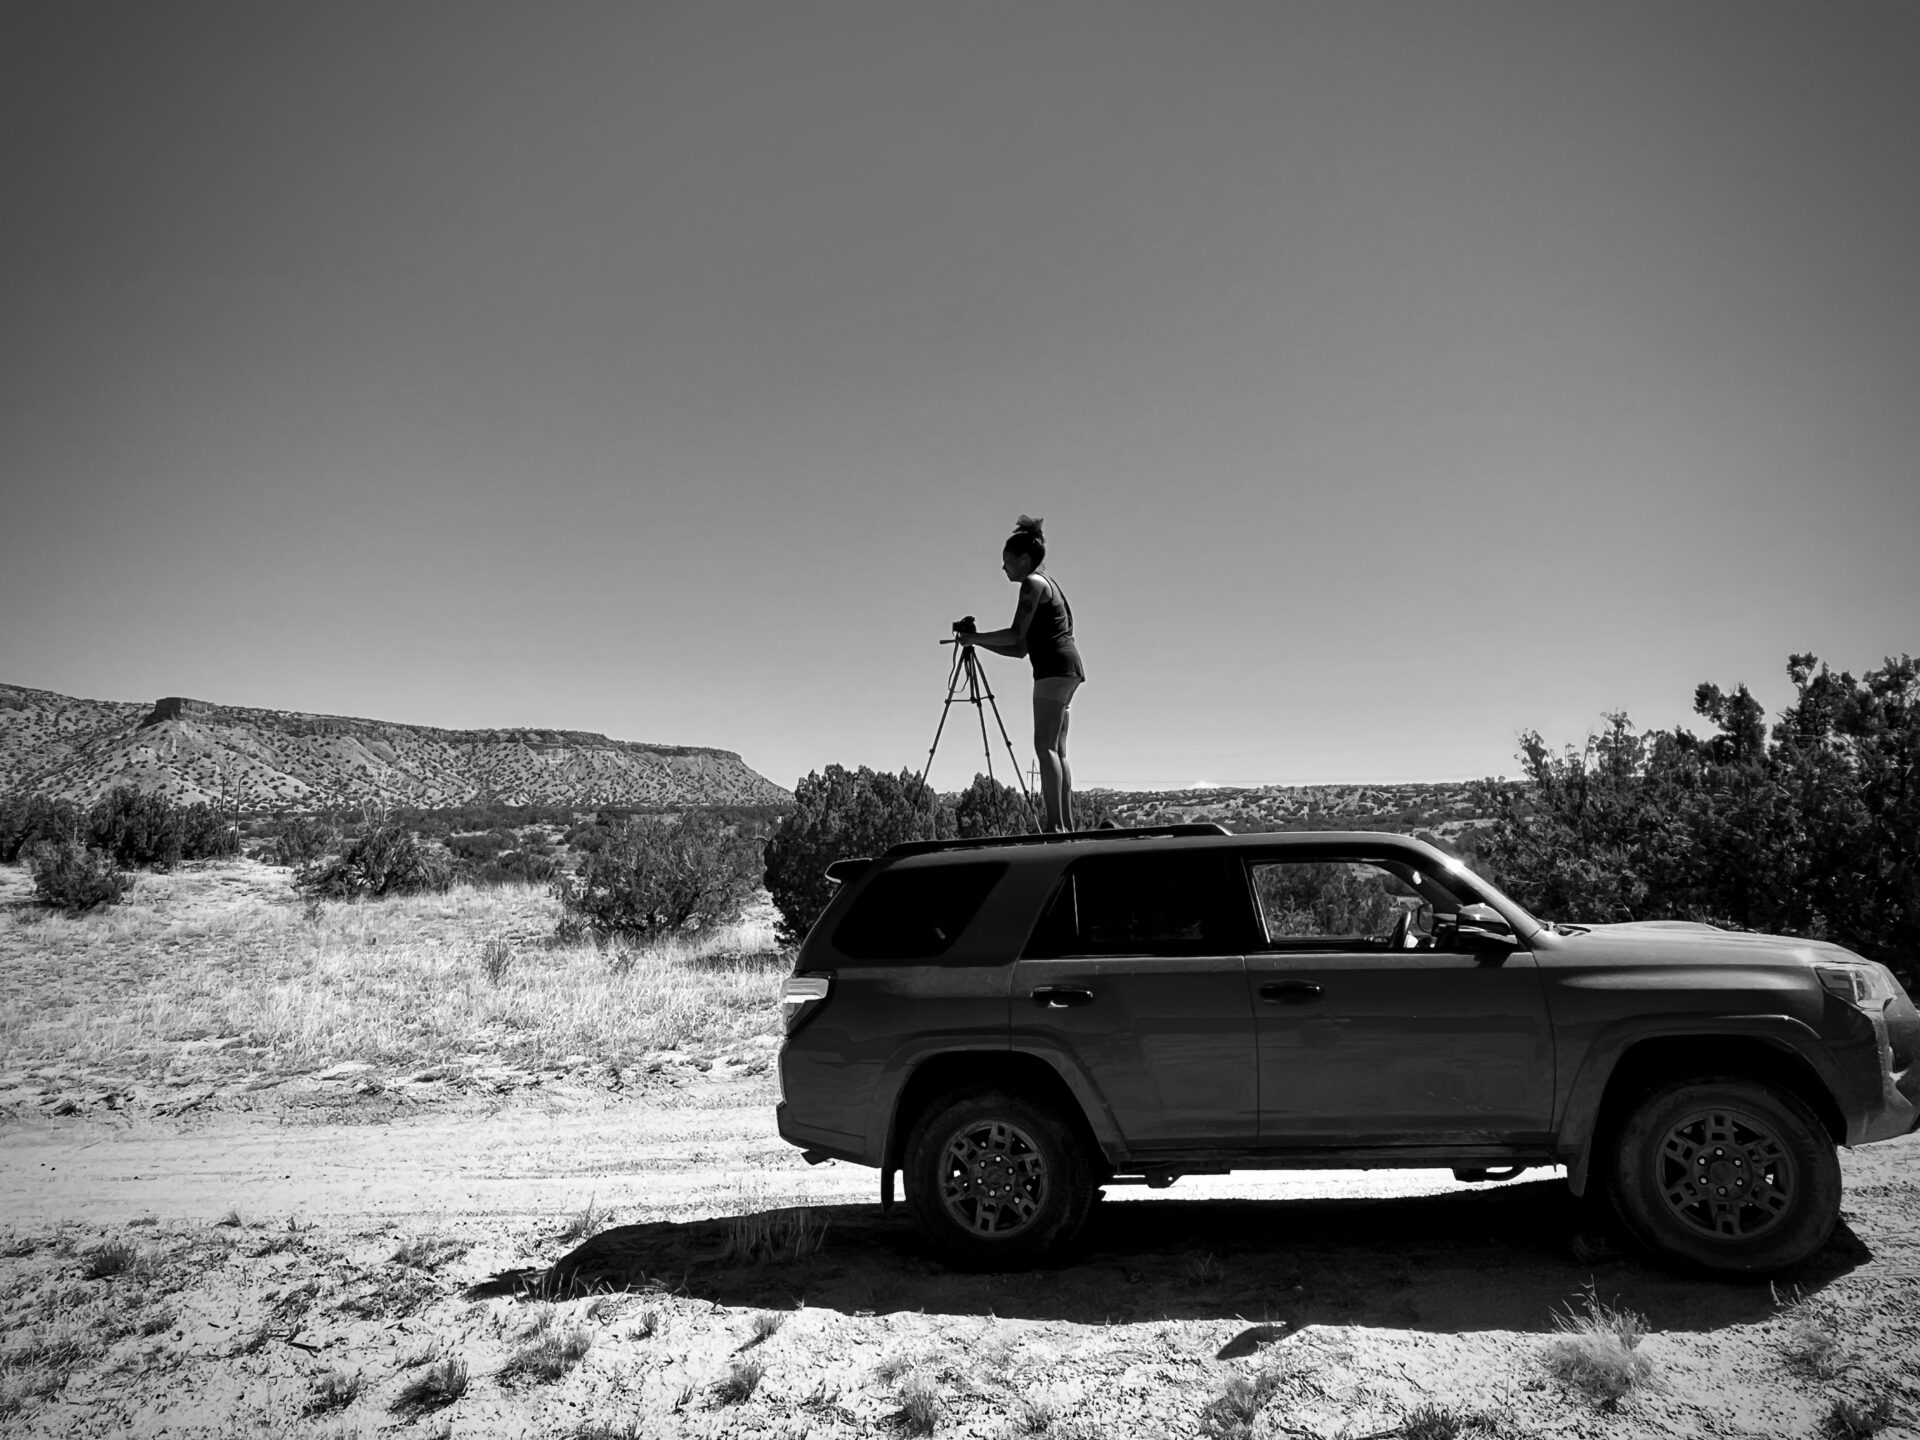 Chantell Murphy films from atop an SUV in New Mexico